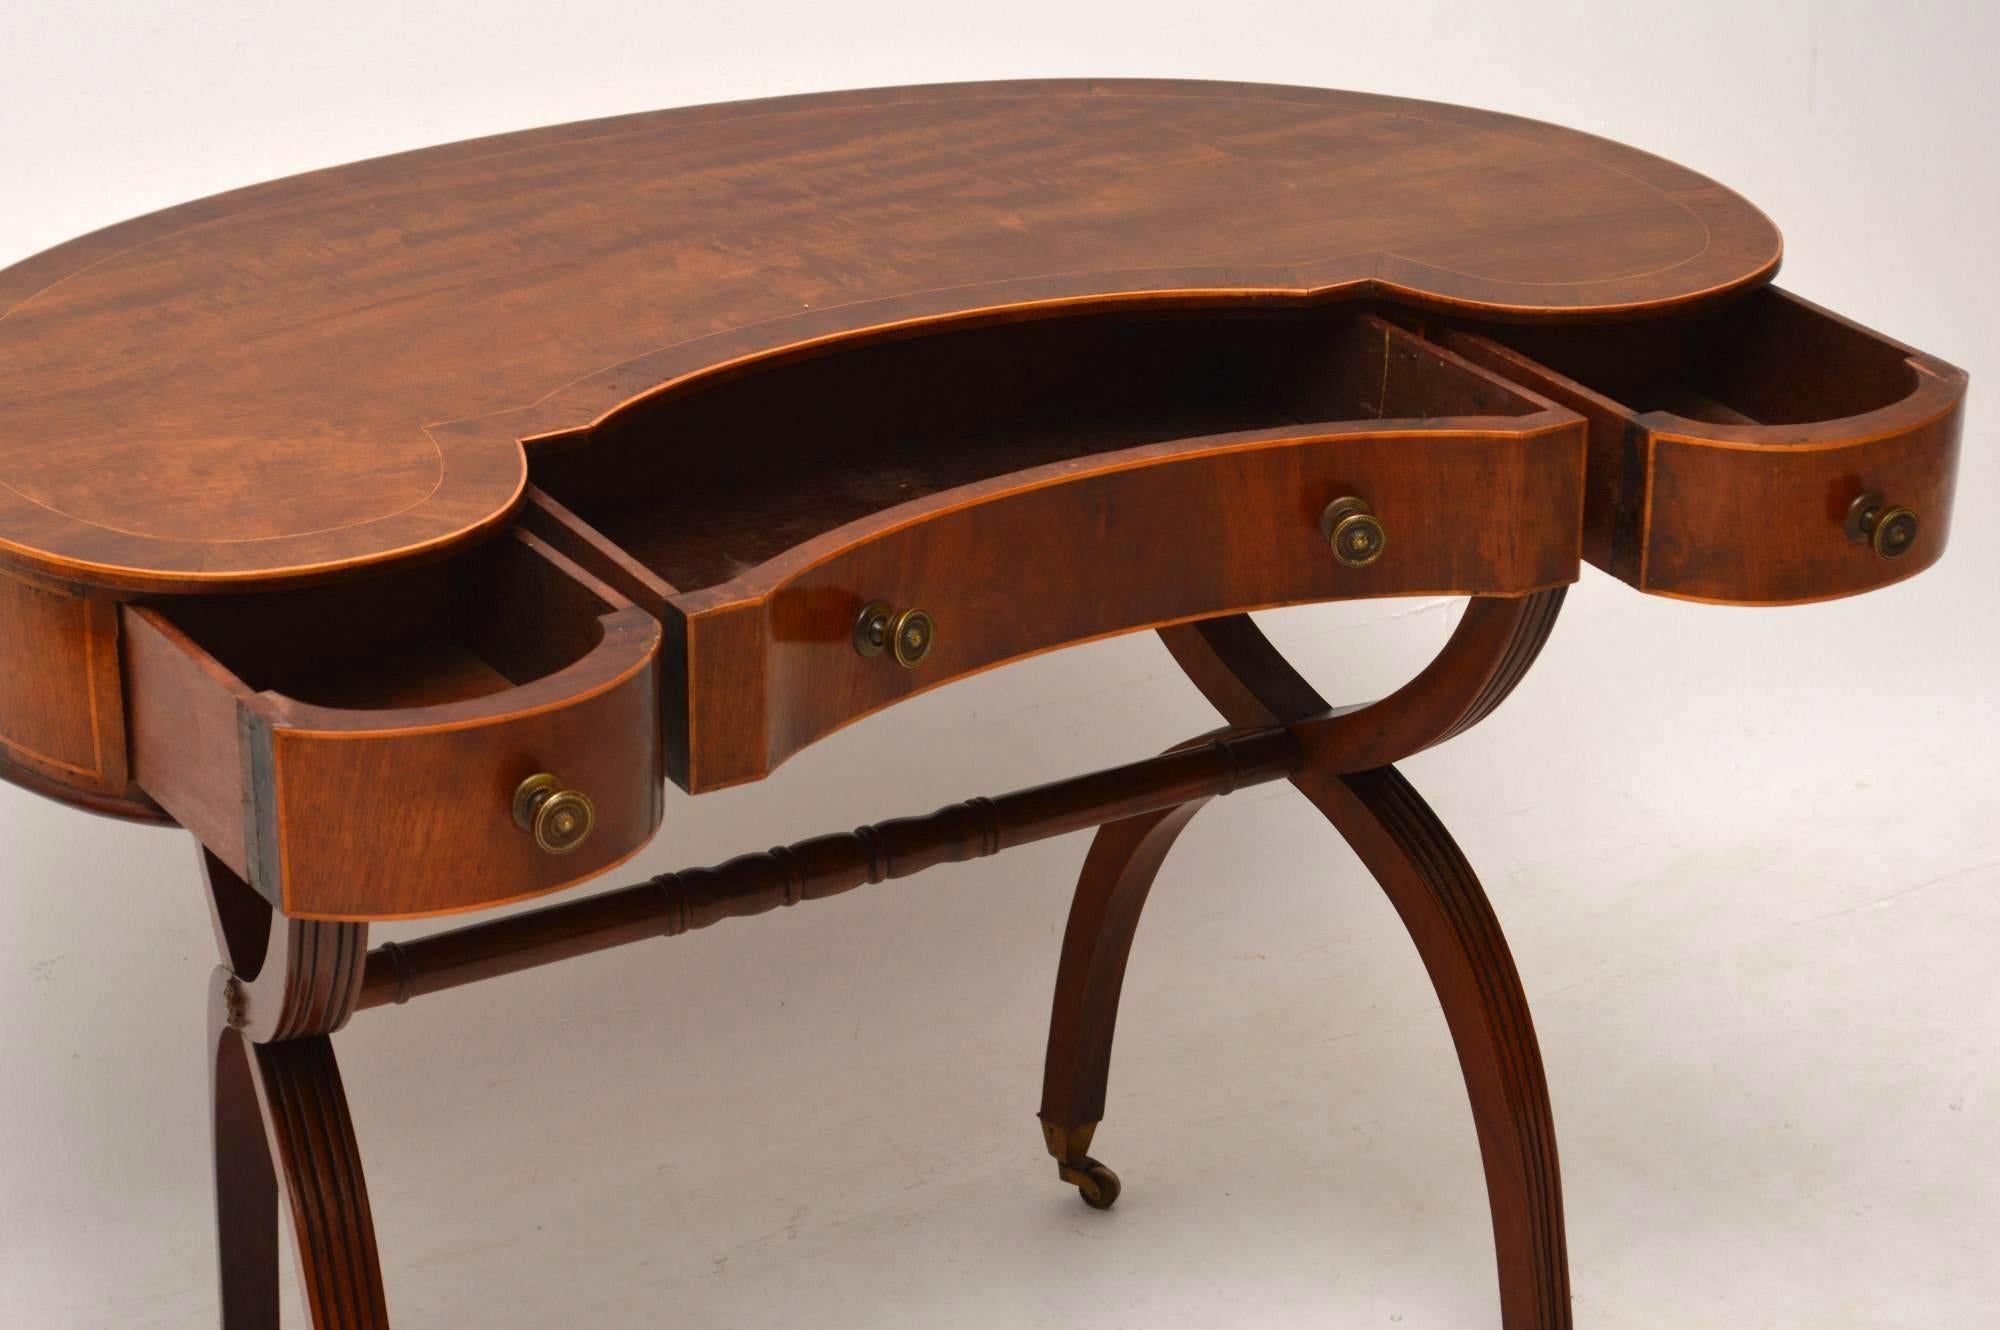 Early 20th Century Antique Mahogany Kidney Shaped Desk or Dressing Table